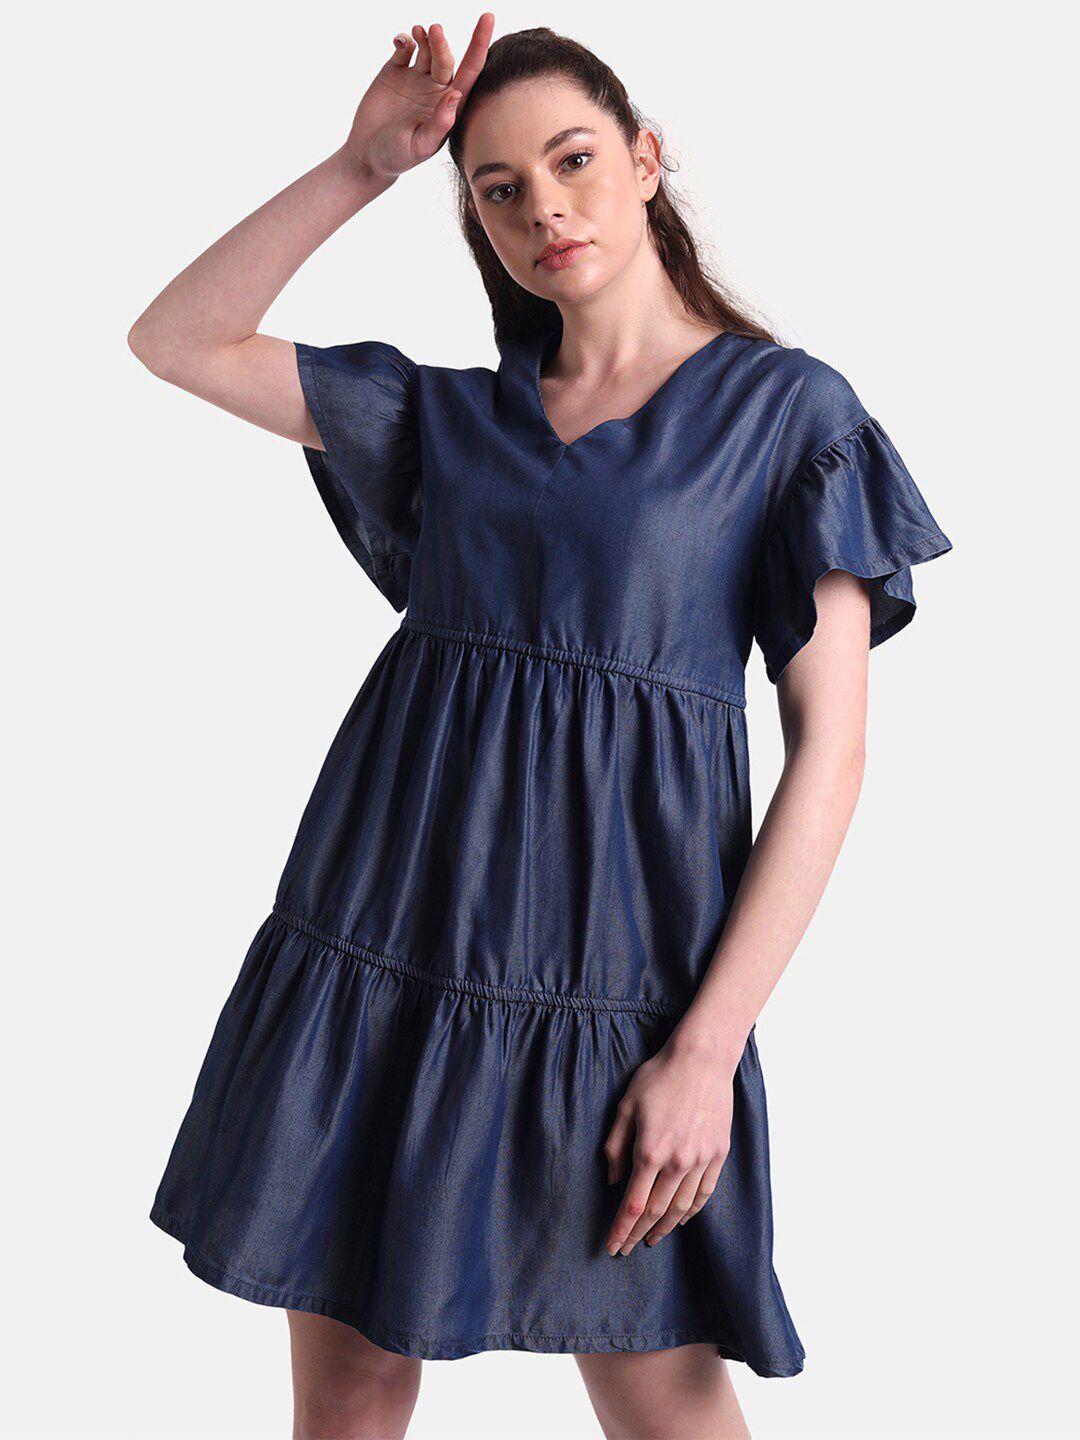 united colors of benetton women navy blue tiered dress